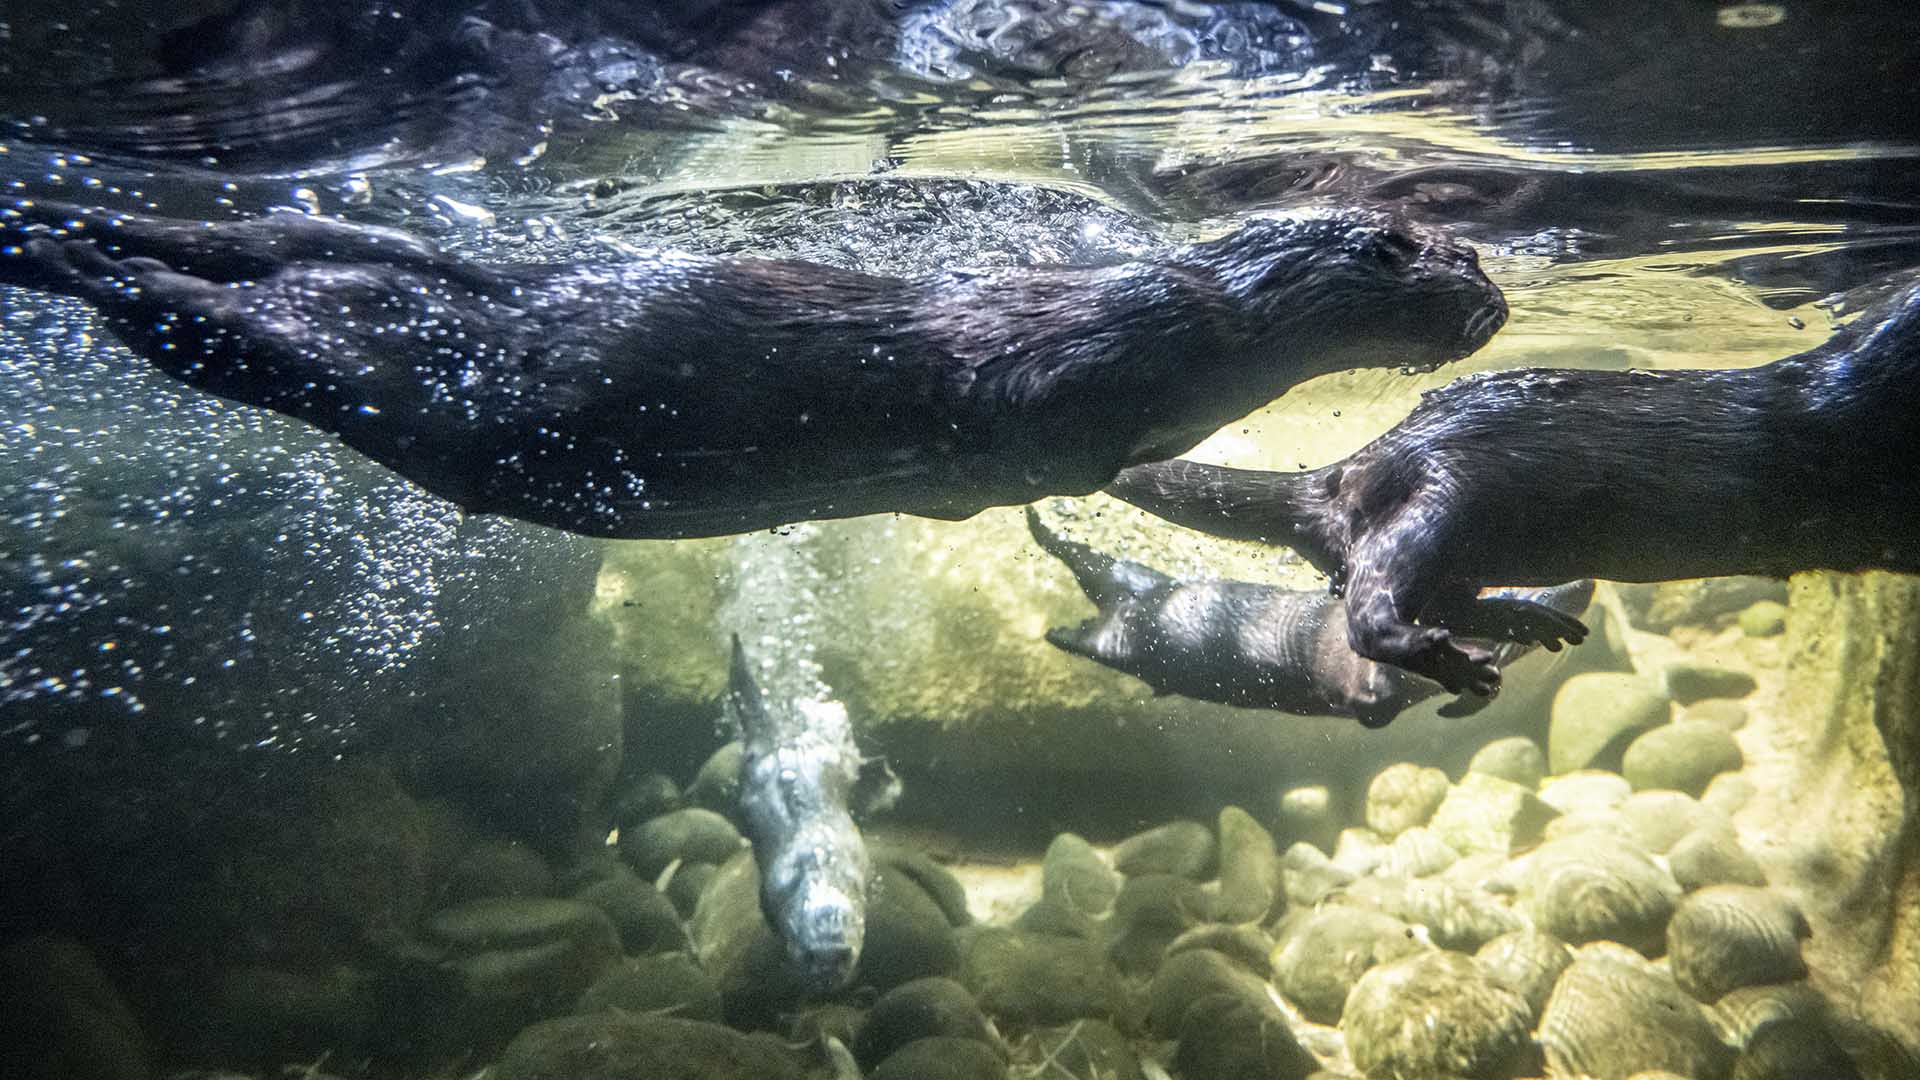 Melbourne Zoo Is Live-Streaming Its Adorable Family of Small-Clawed Otters 24/7 Again